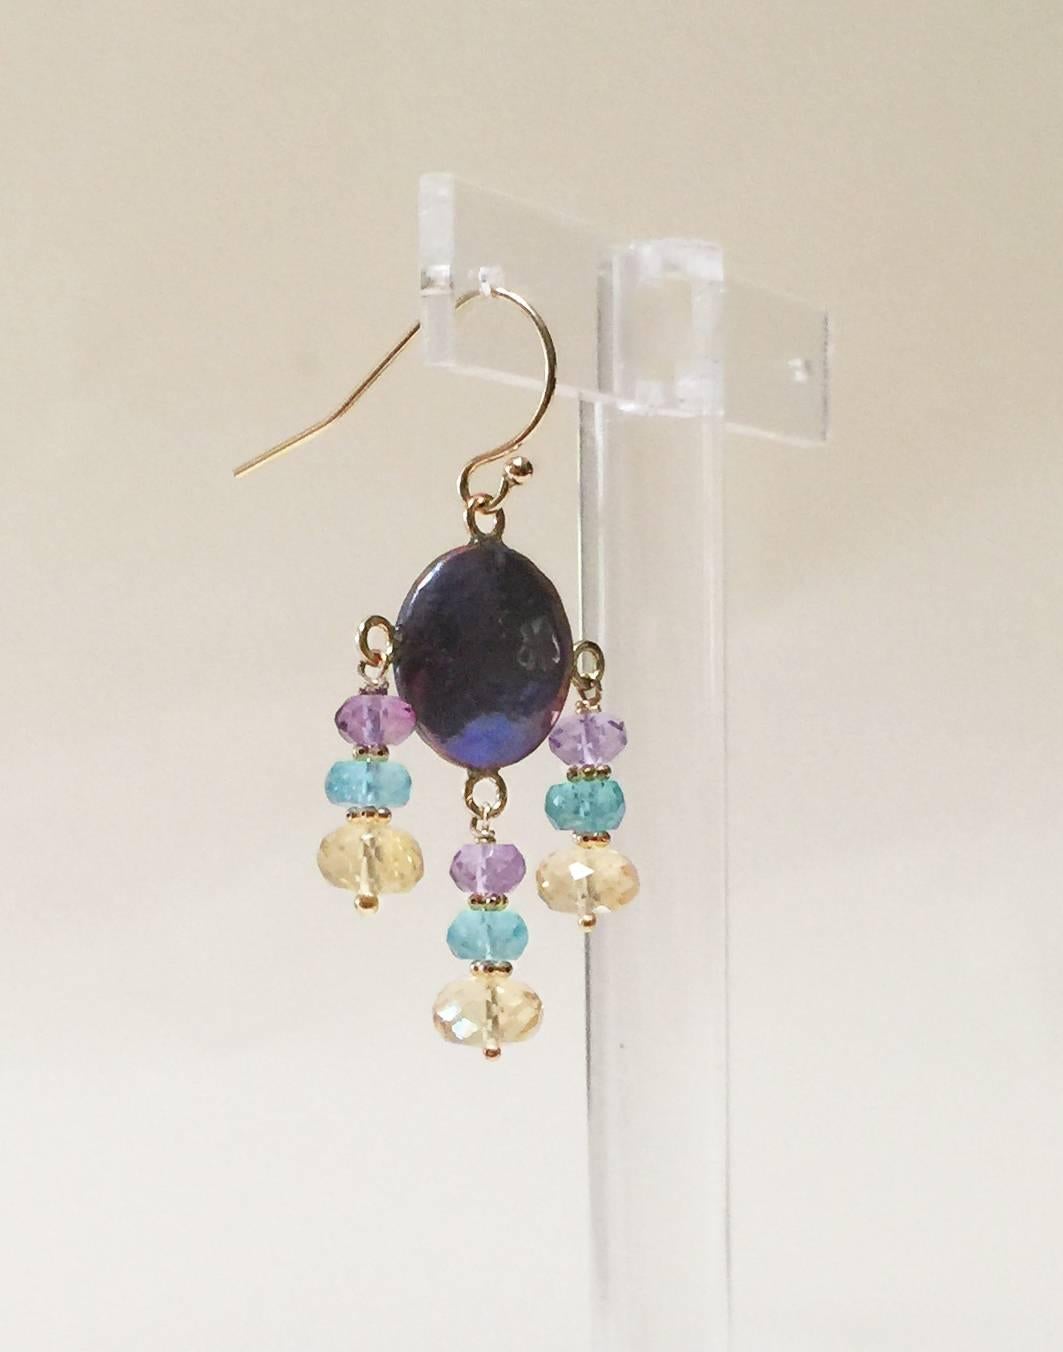 The black pearl is the centerpiece of these delicate and detailed earrings (1.6 inches). The pastel colors of the amethyst, blue topaz, and citrine beads are bright and whimsical.  Small 14 k yellow gold beads subtly connect the stones perfectly.